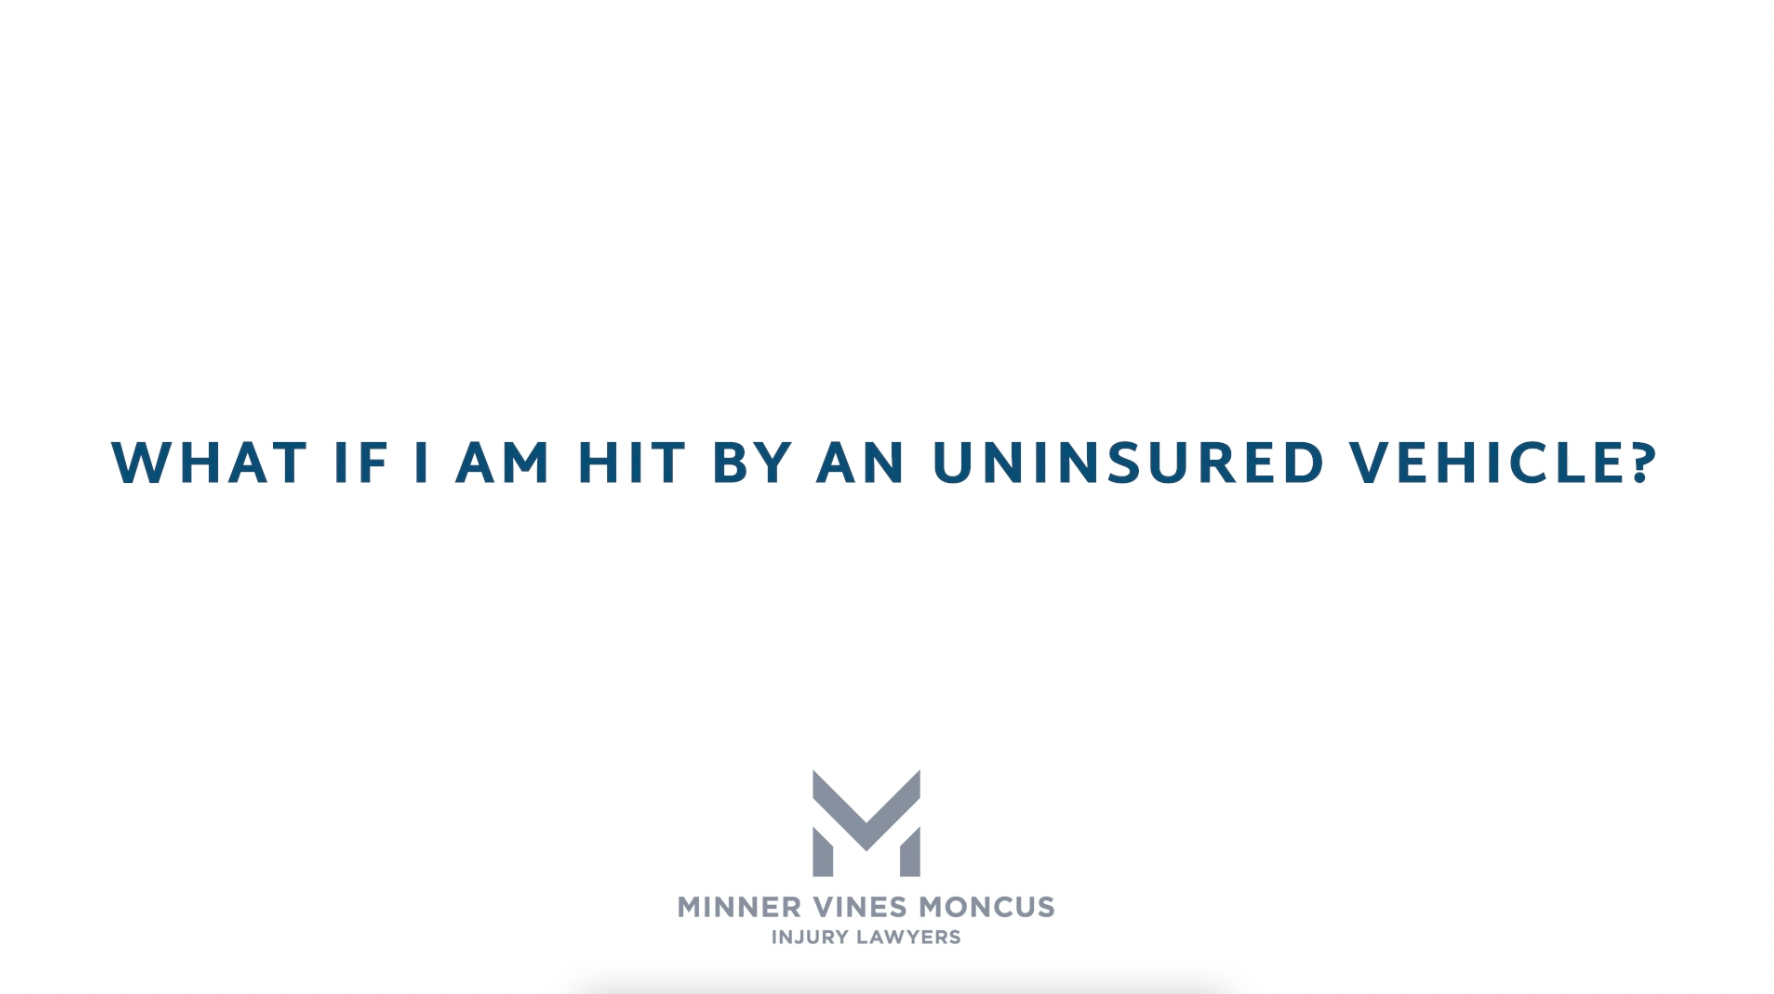 What if I am hit by an uninsured vehicle?